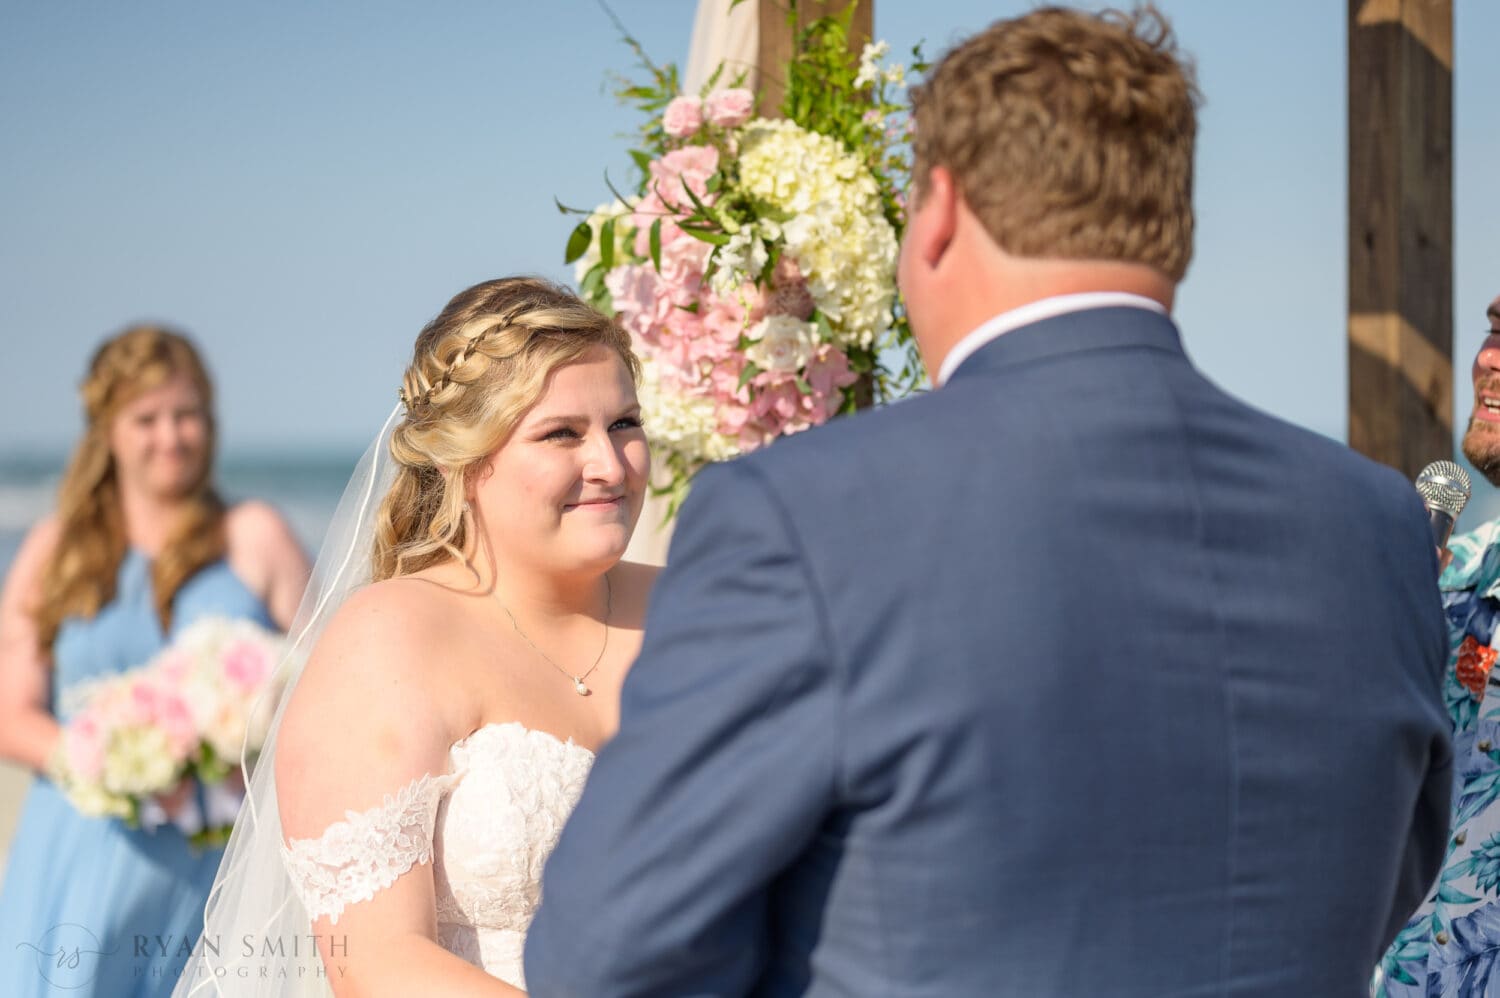 Bride looking into grooms eyes during the ceremony - Pawleys Island Beach House